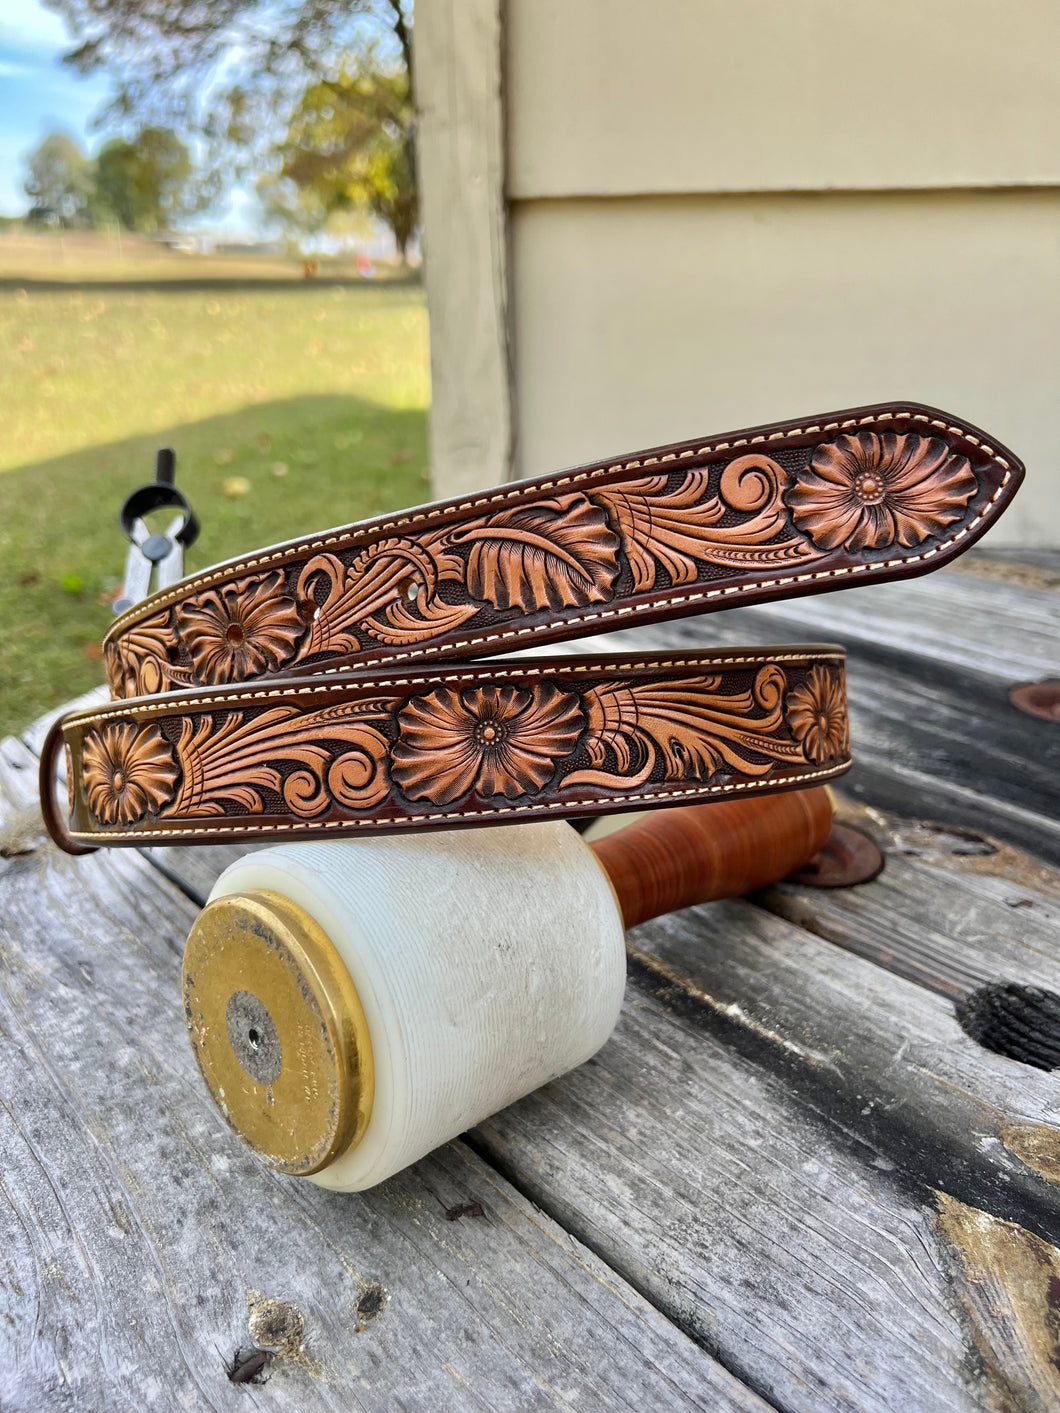 Floral Tooled Belt - Size 36 – Girty Leather Co.